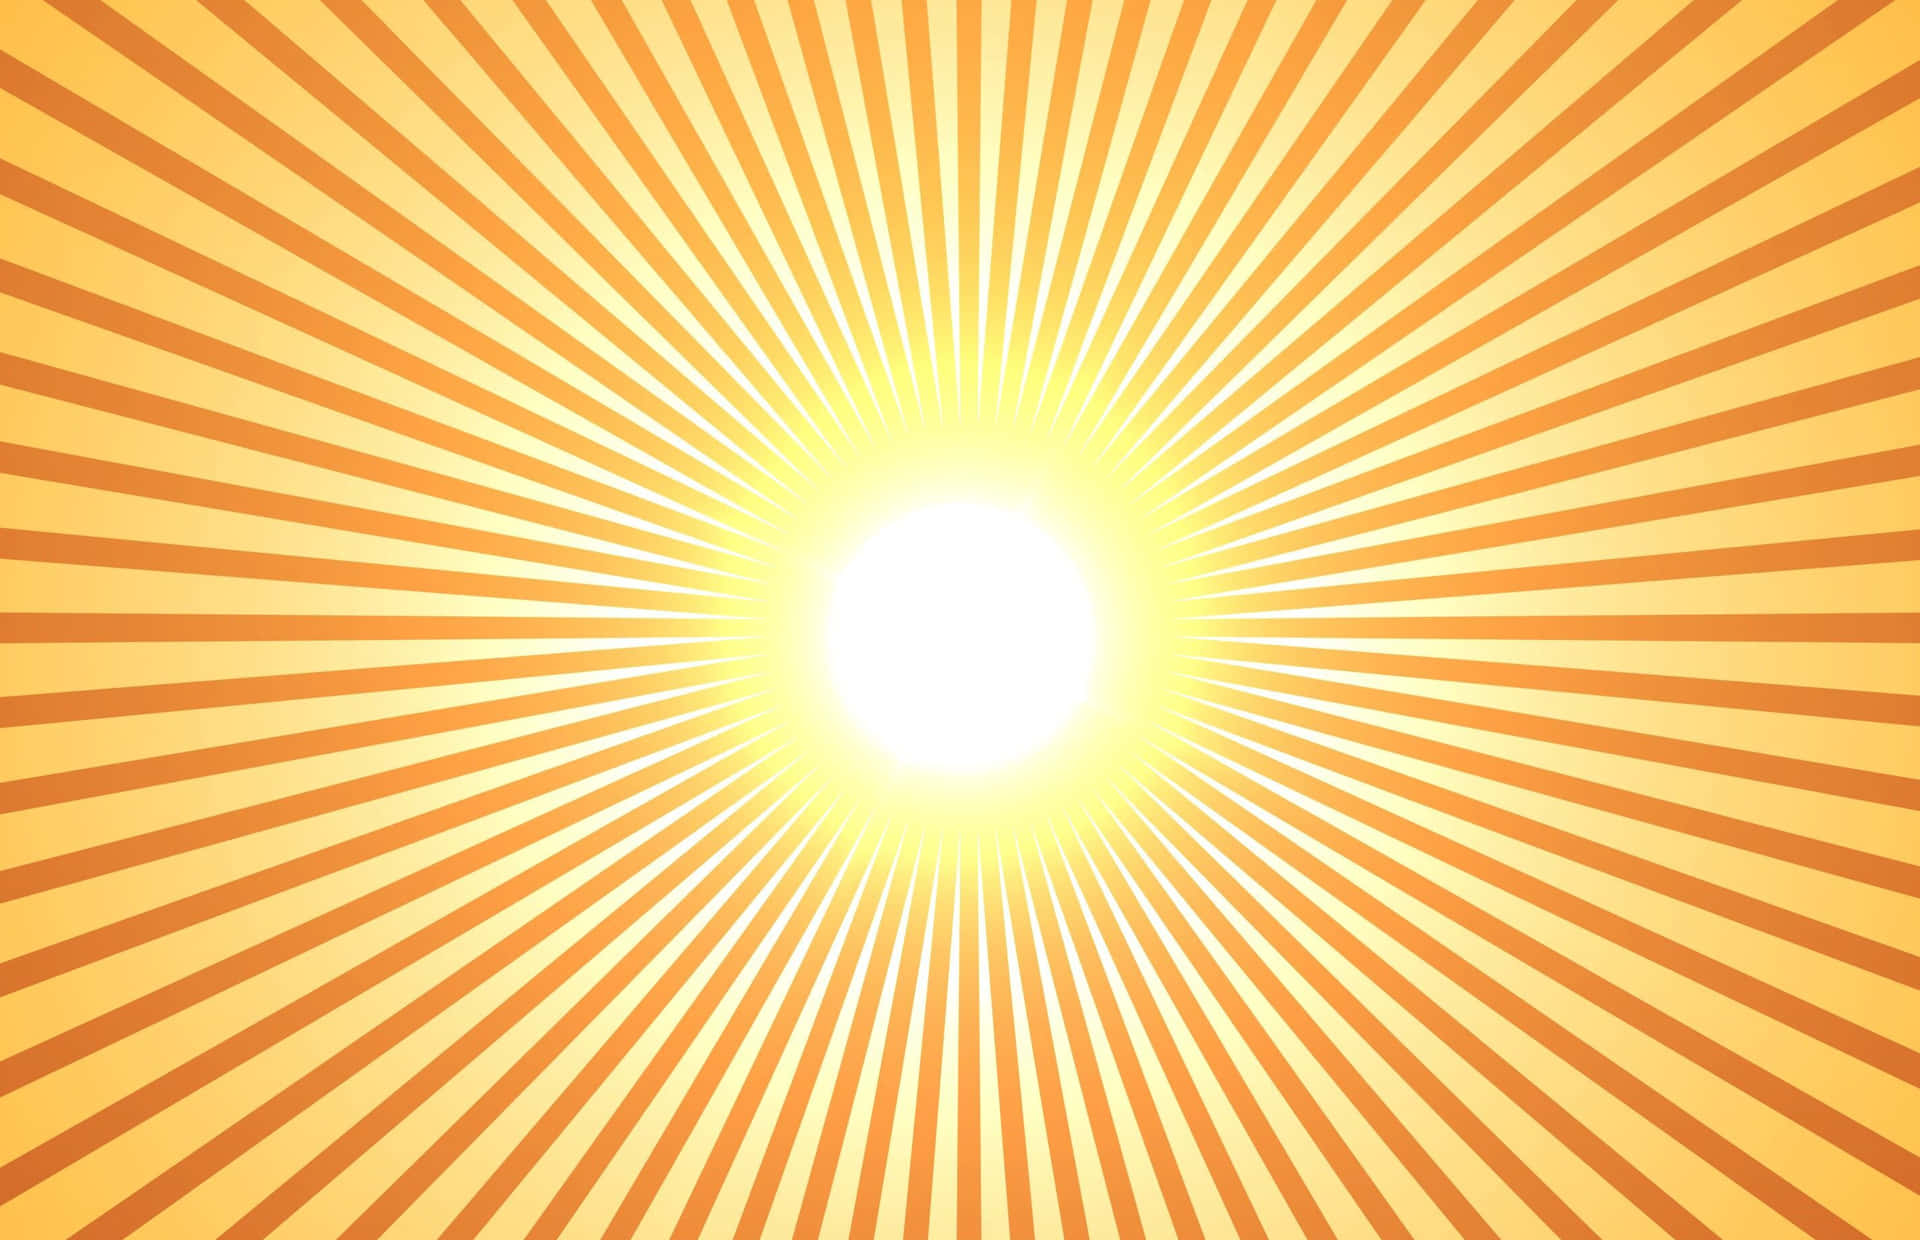 Get energized by the Bright Rays of the Sun!